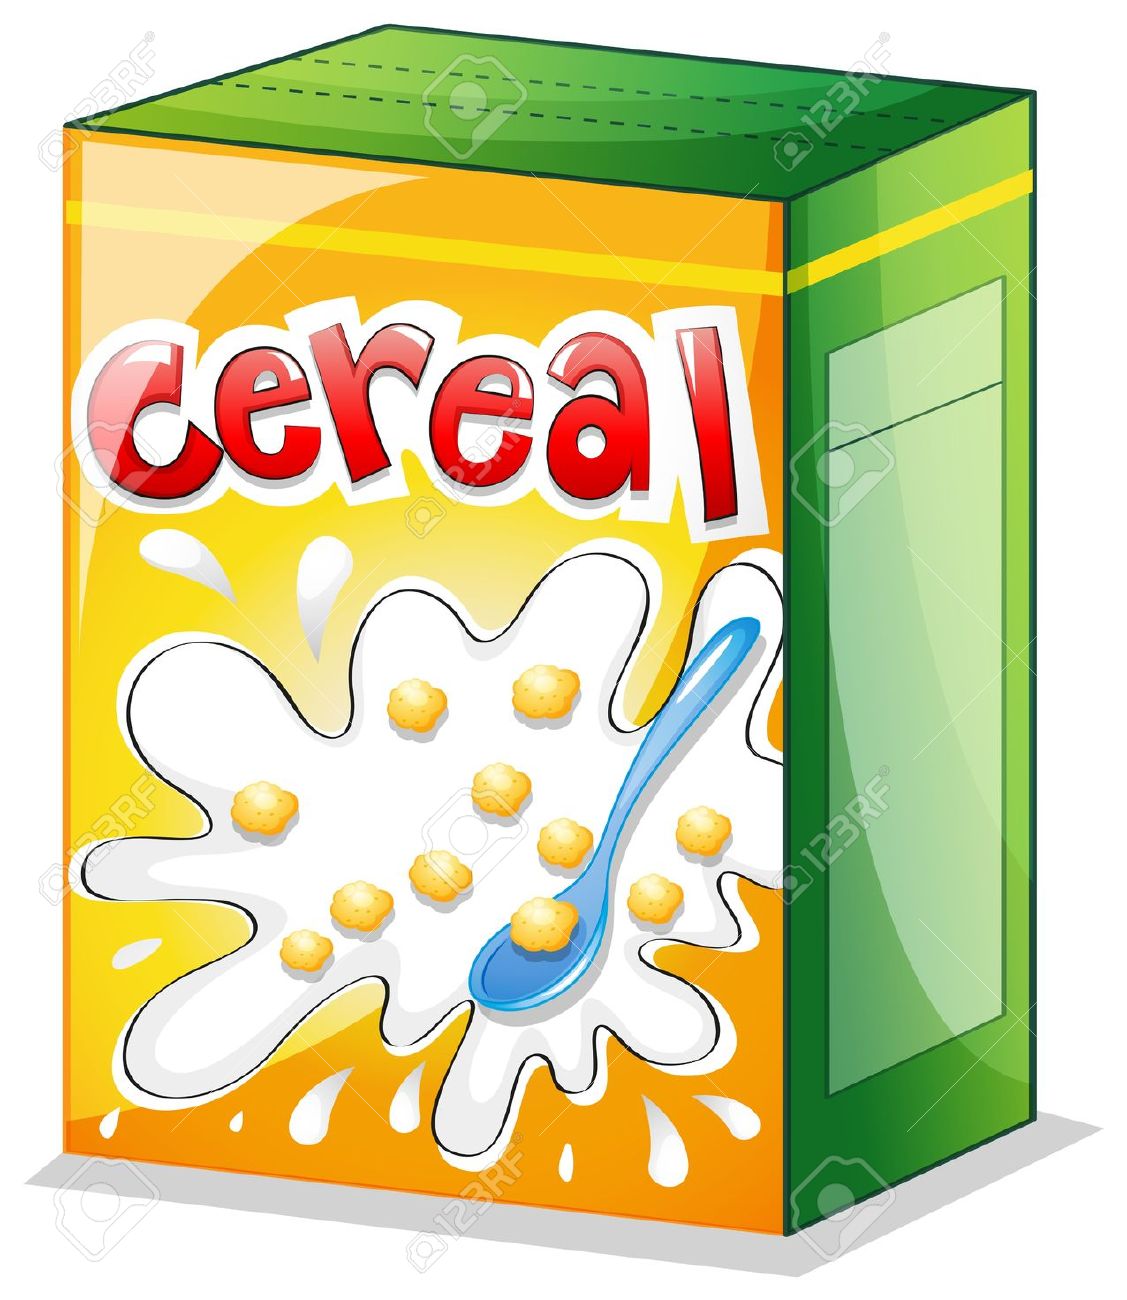 Printable Pictures Of Cereal Boxes Cereal Box Templates Word Excel